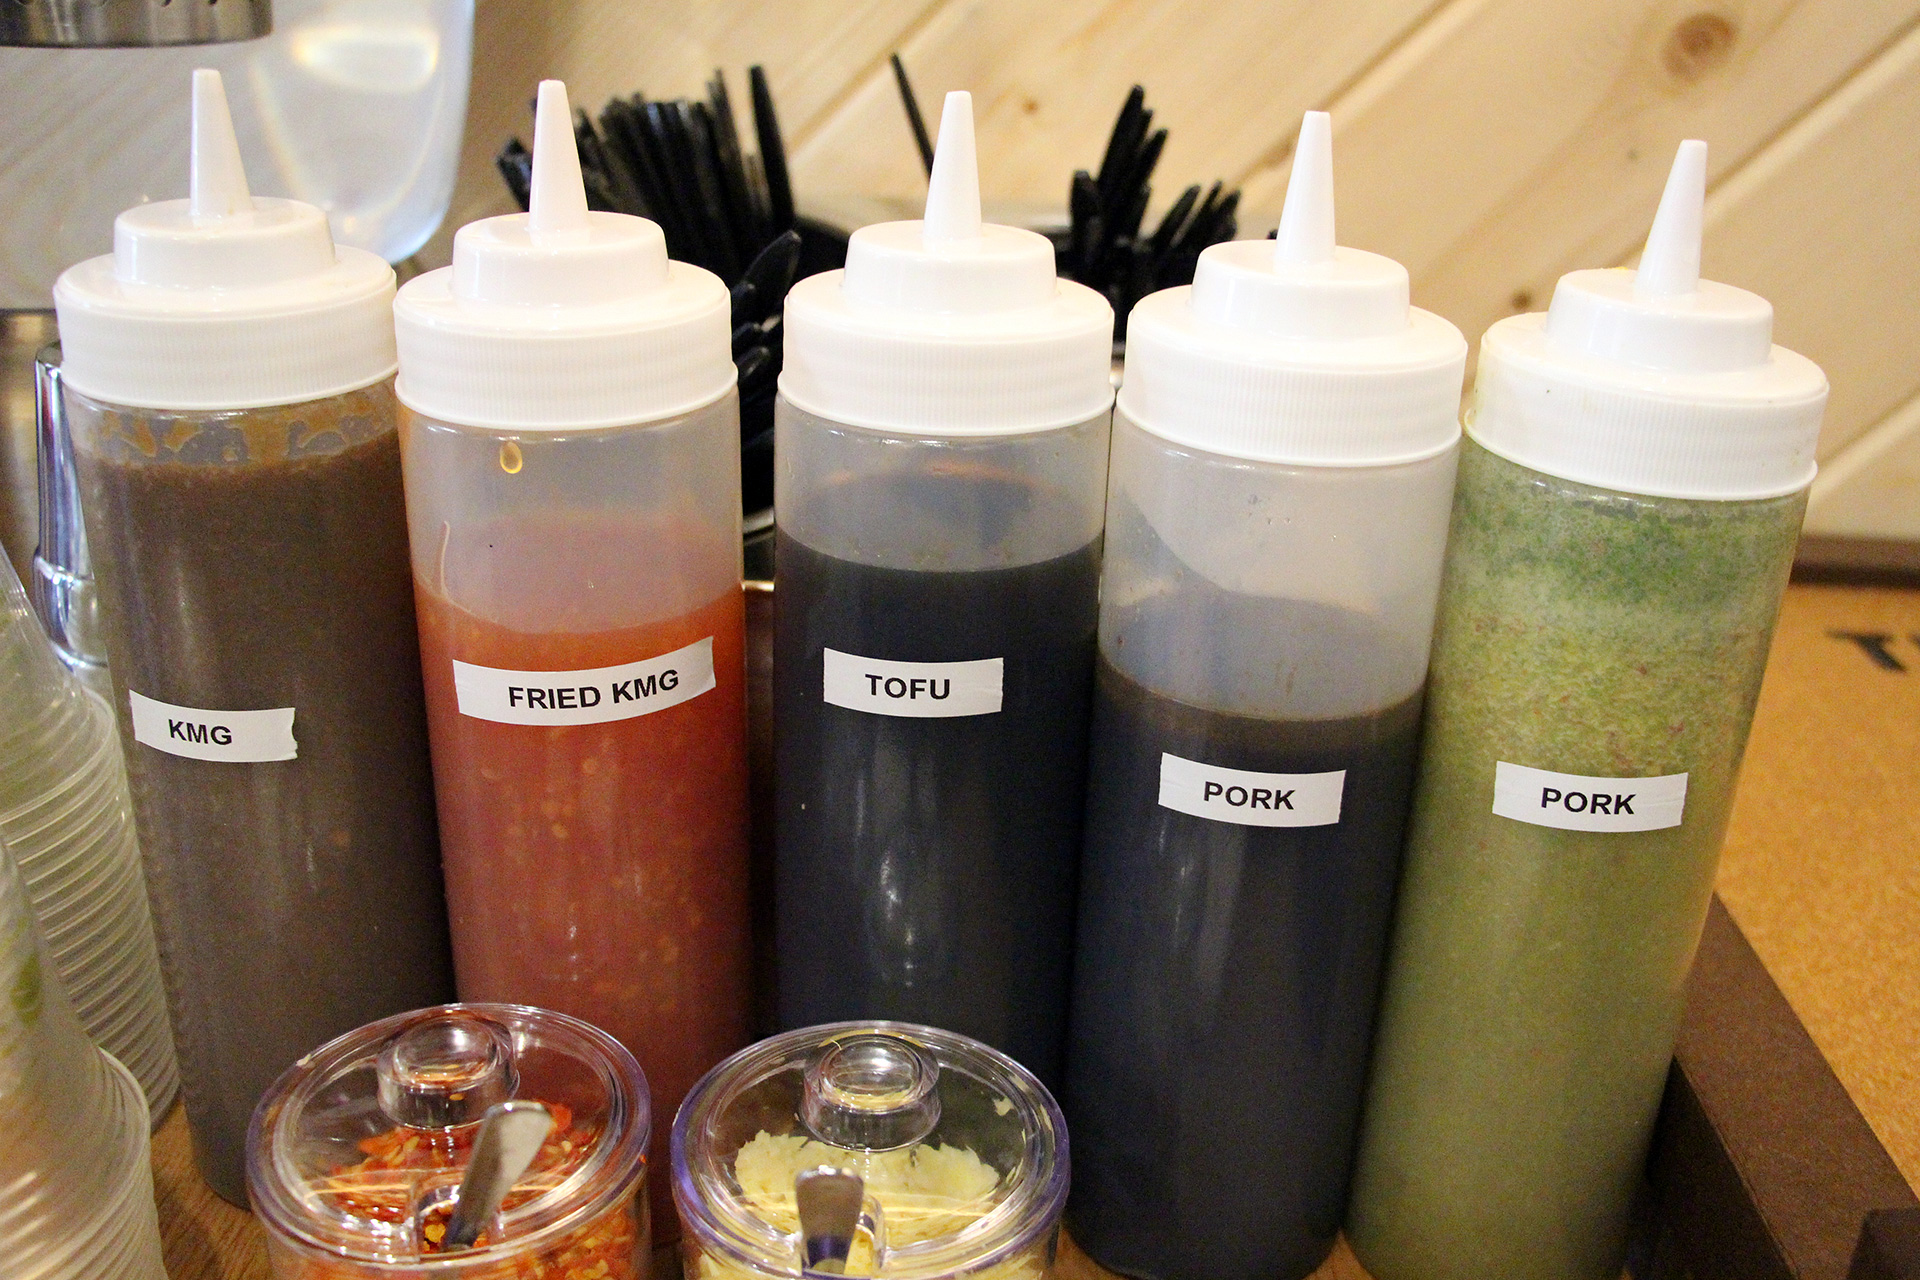 Sauces that accompany the dishes.